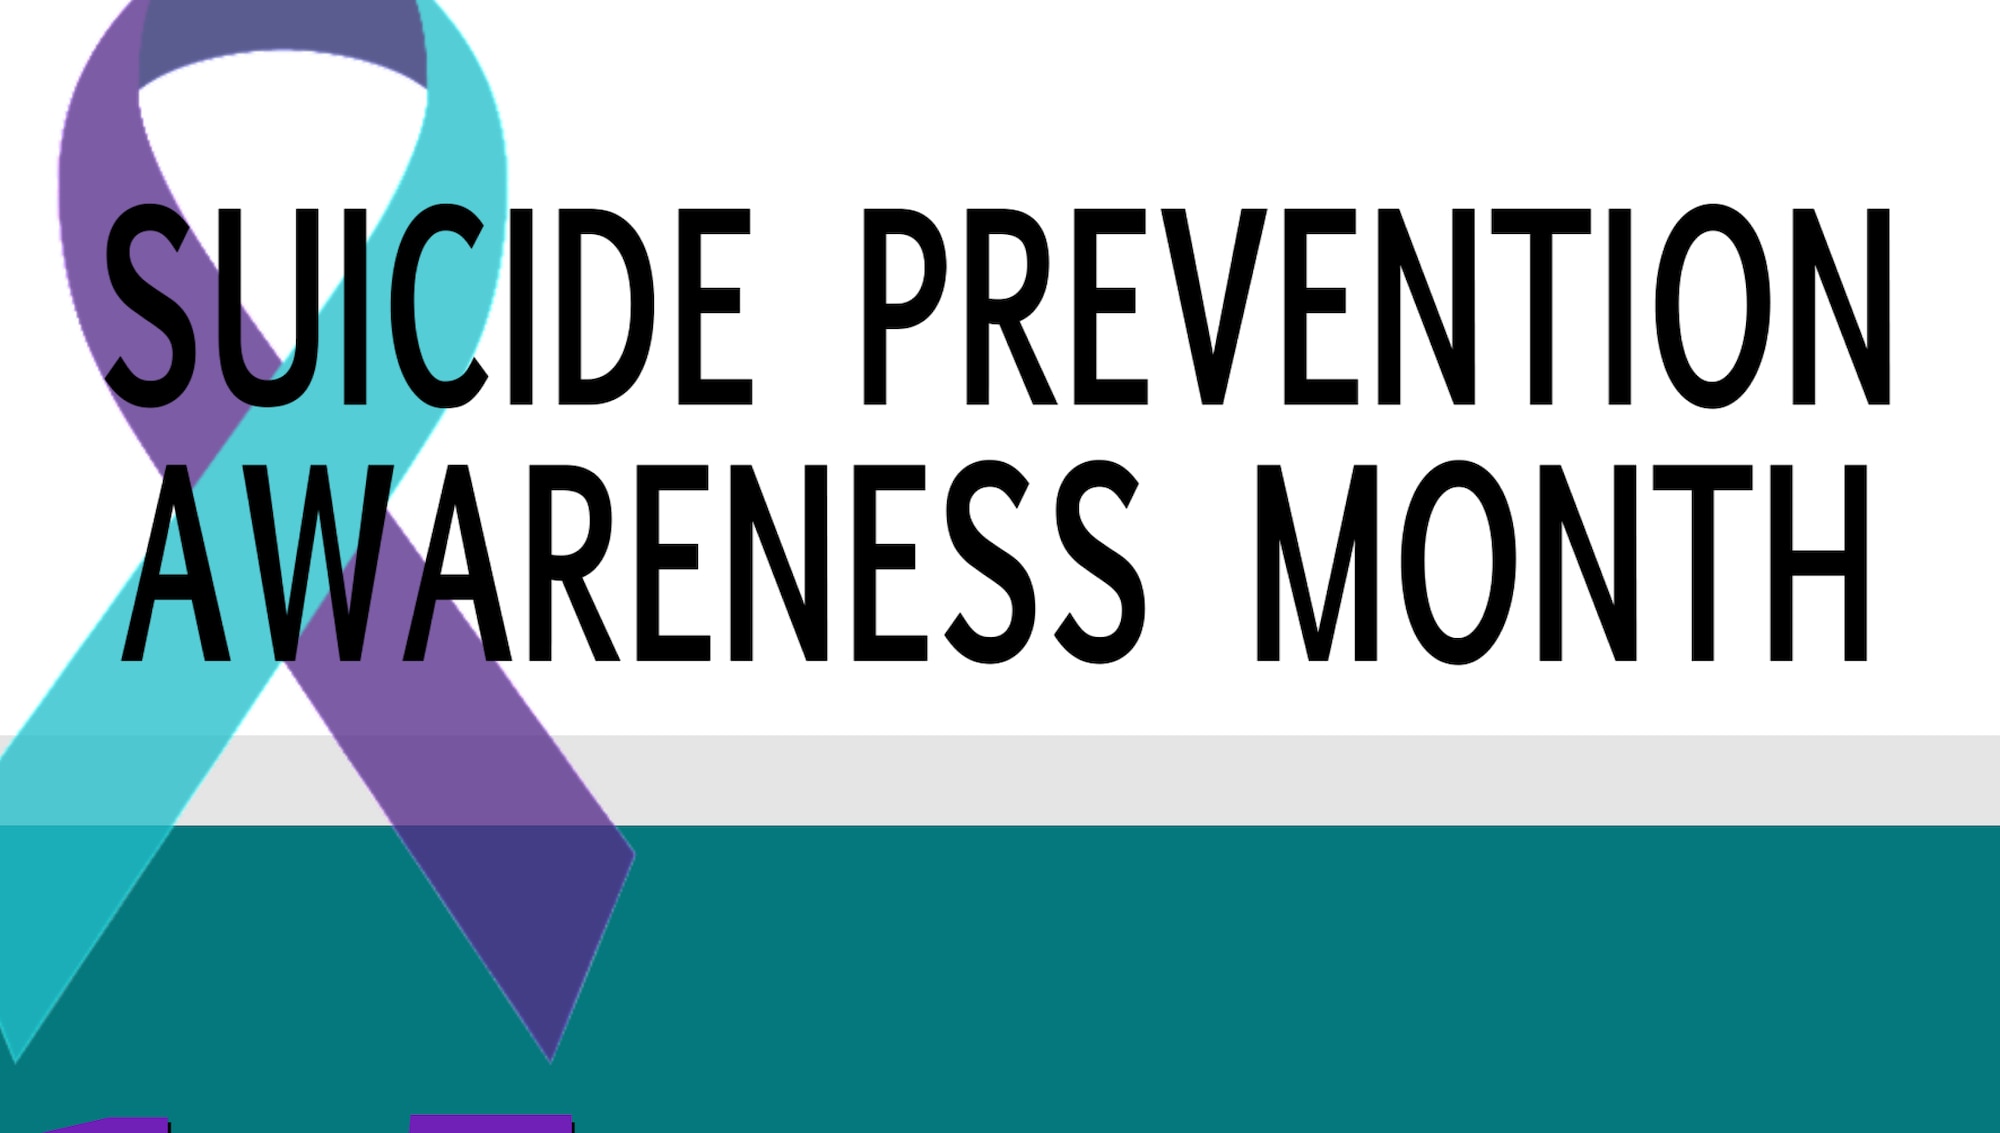 This layout and design was created by 374th Airlift Wing Public Affairs, Yokota Air Base, Japan, in honor of Suicide Prevention Awareness Month on Sept. 15, 2020. (U.S. Air Force layout & design by Staff Sgt. Taylor A. Workman)